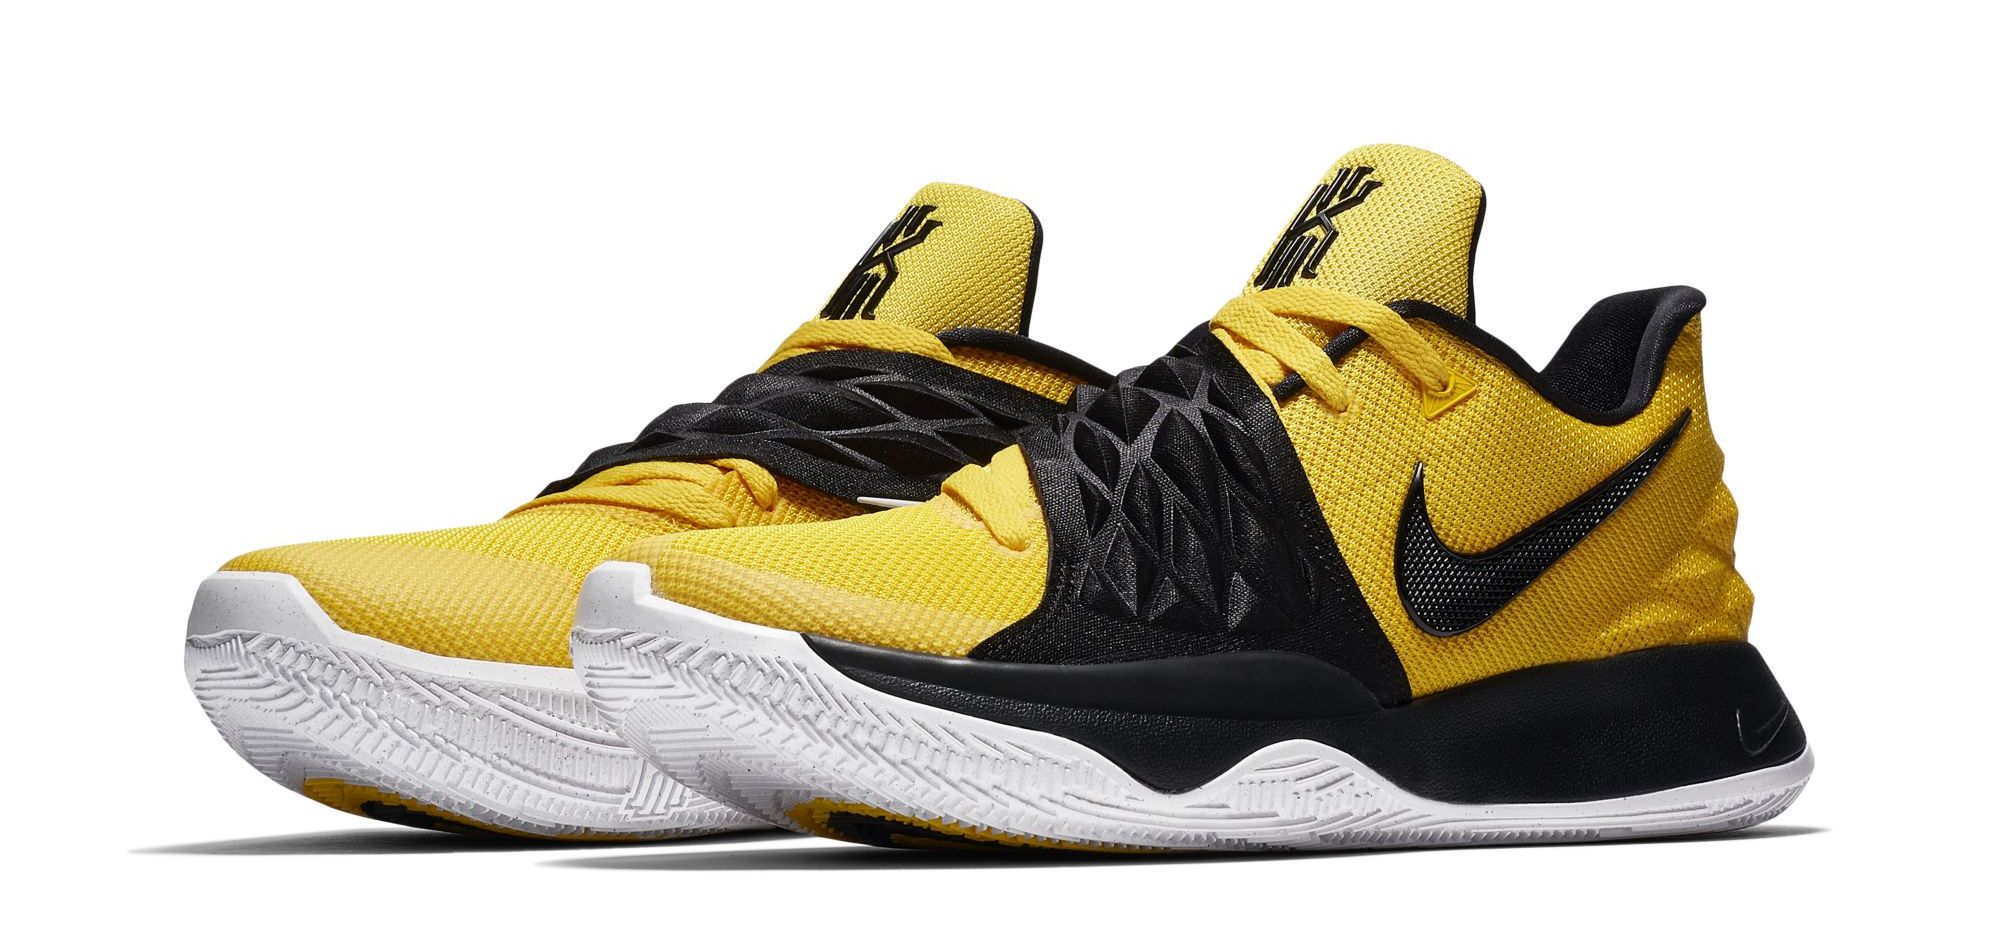 kyrie low 2 yellow